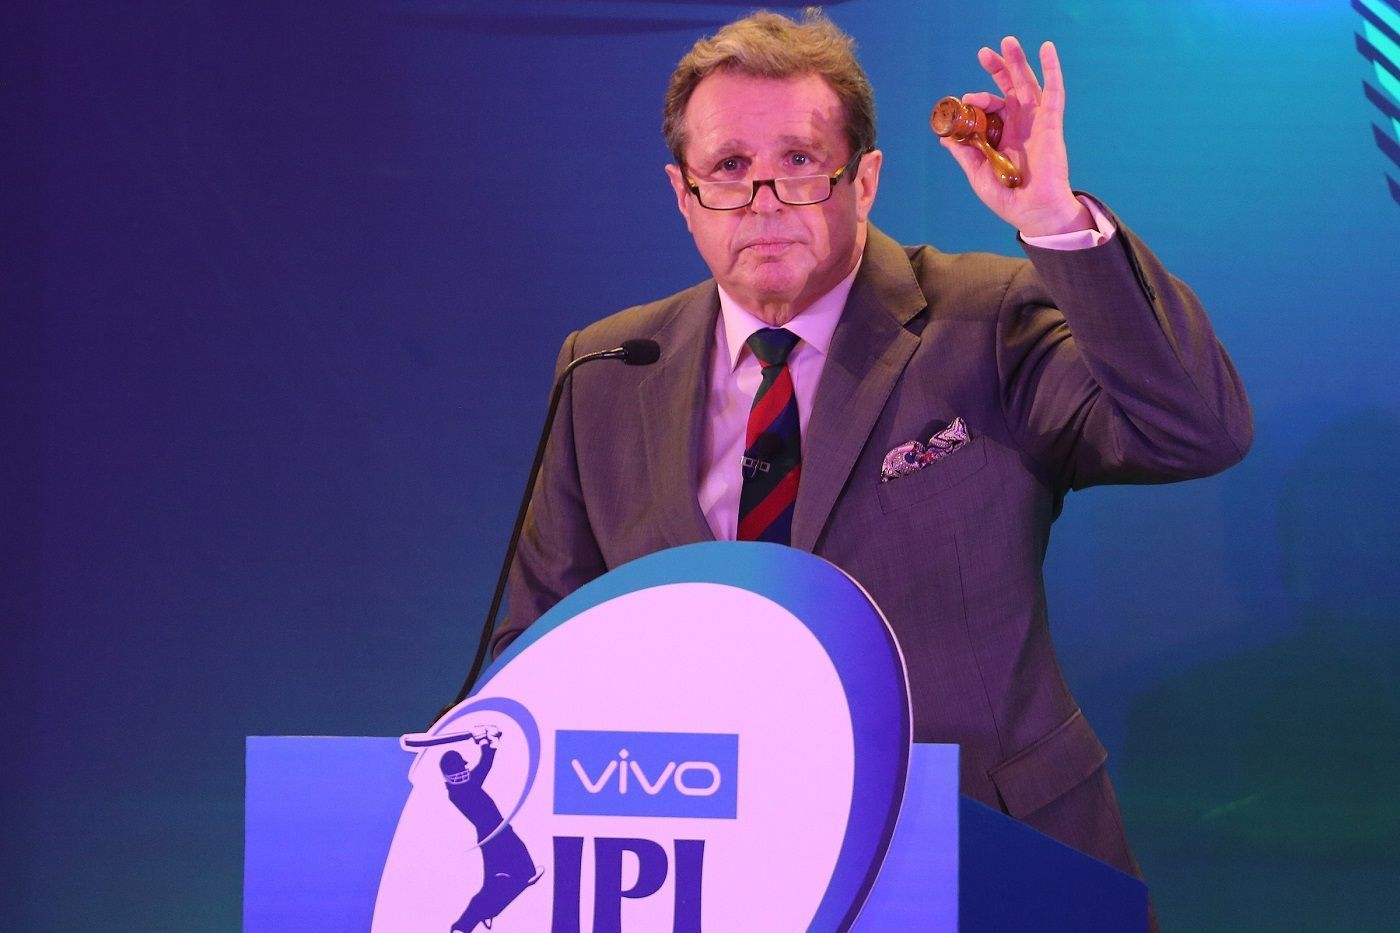 Richard Madley is the architect of IPL auctions (Credit: IPL/BCCI)